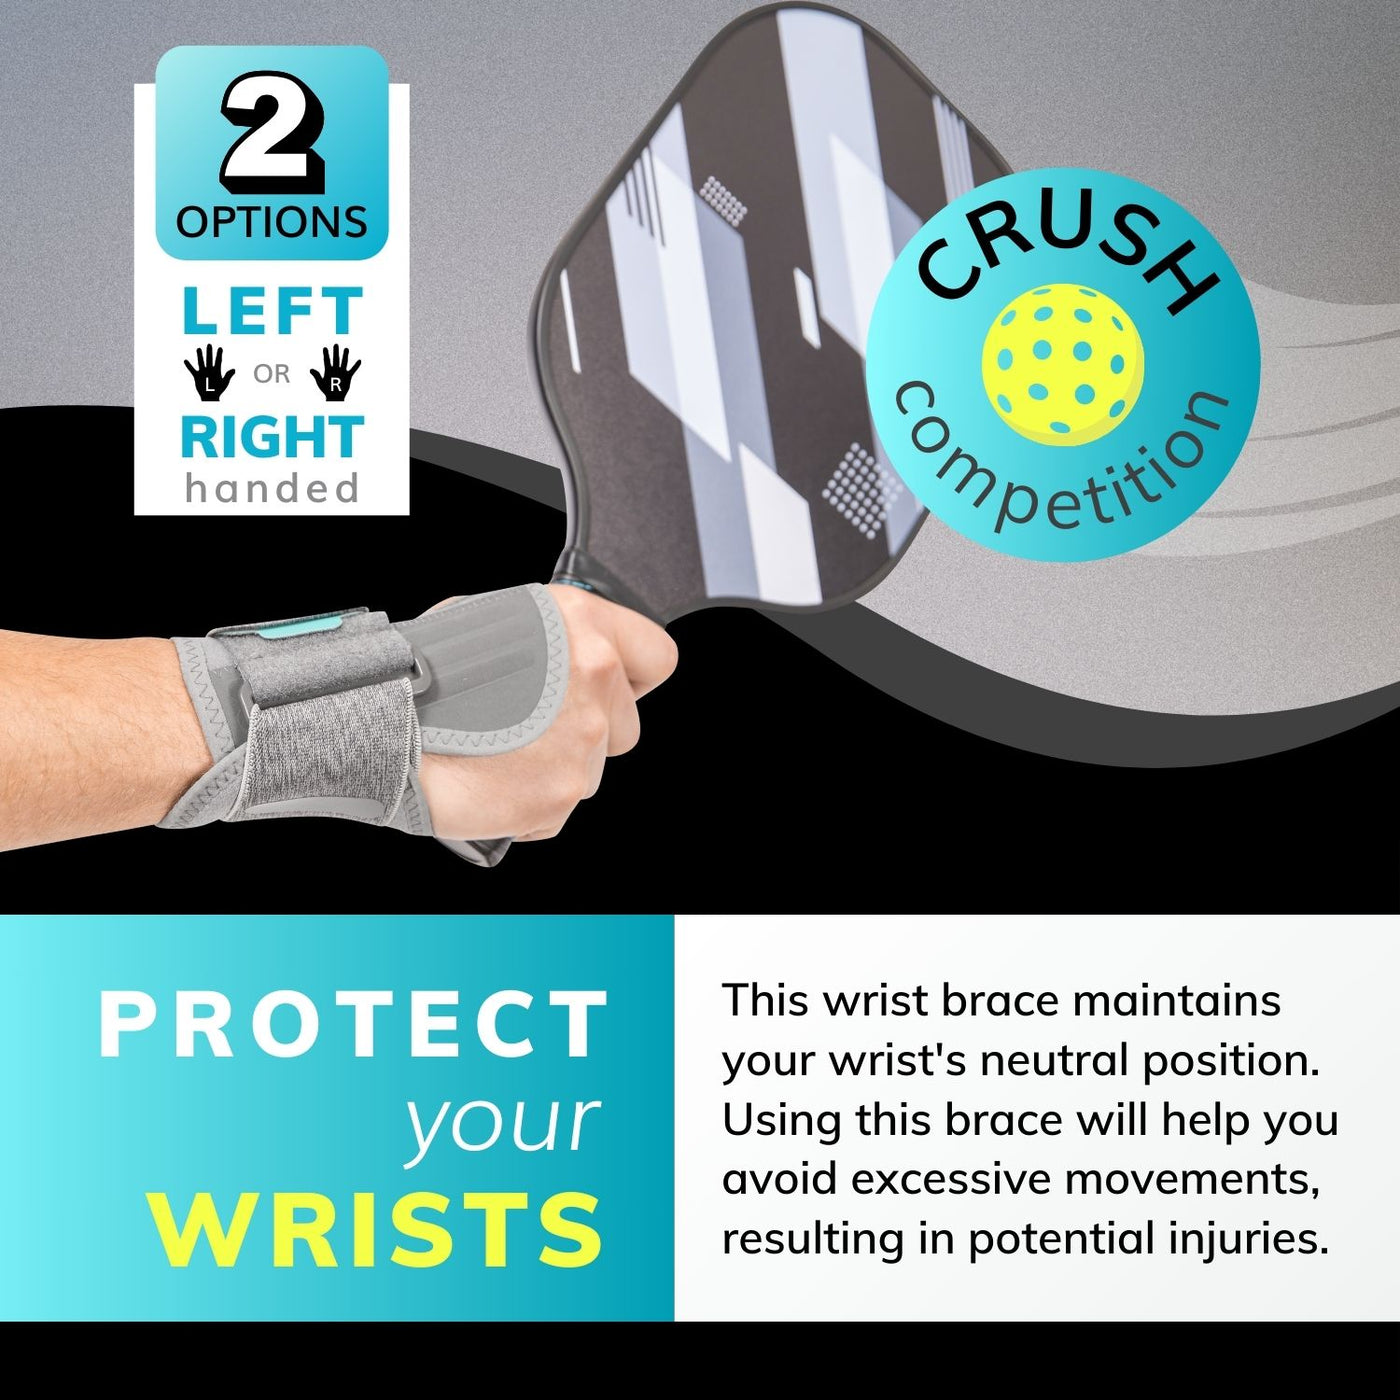 The pickleball wrist pain brace keeps your wrist in a neutral position preventing injuries